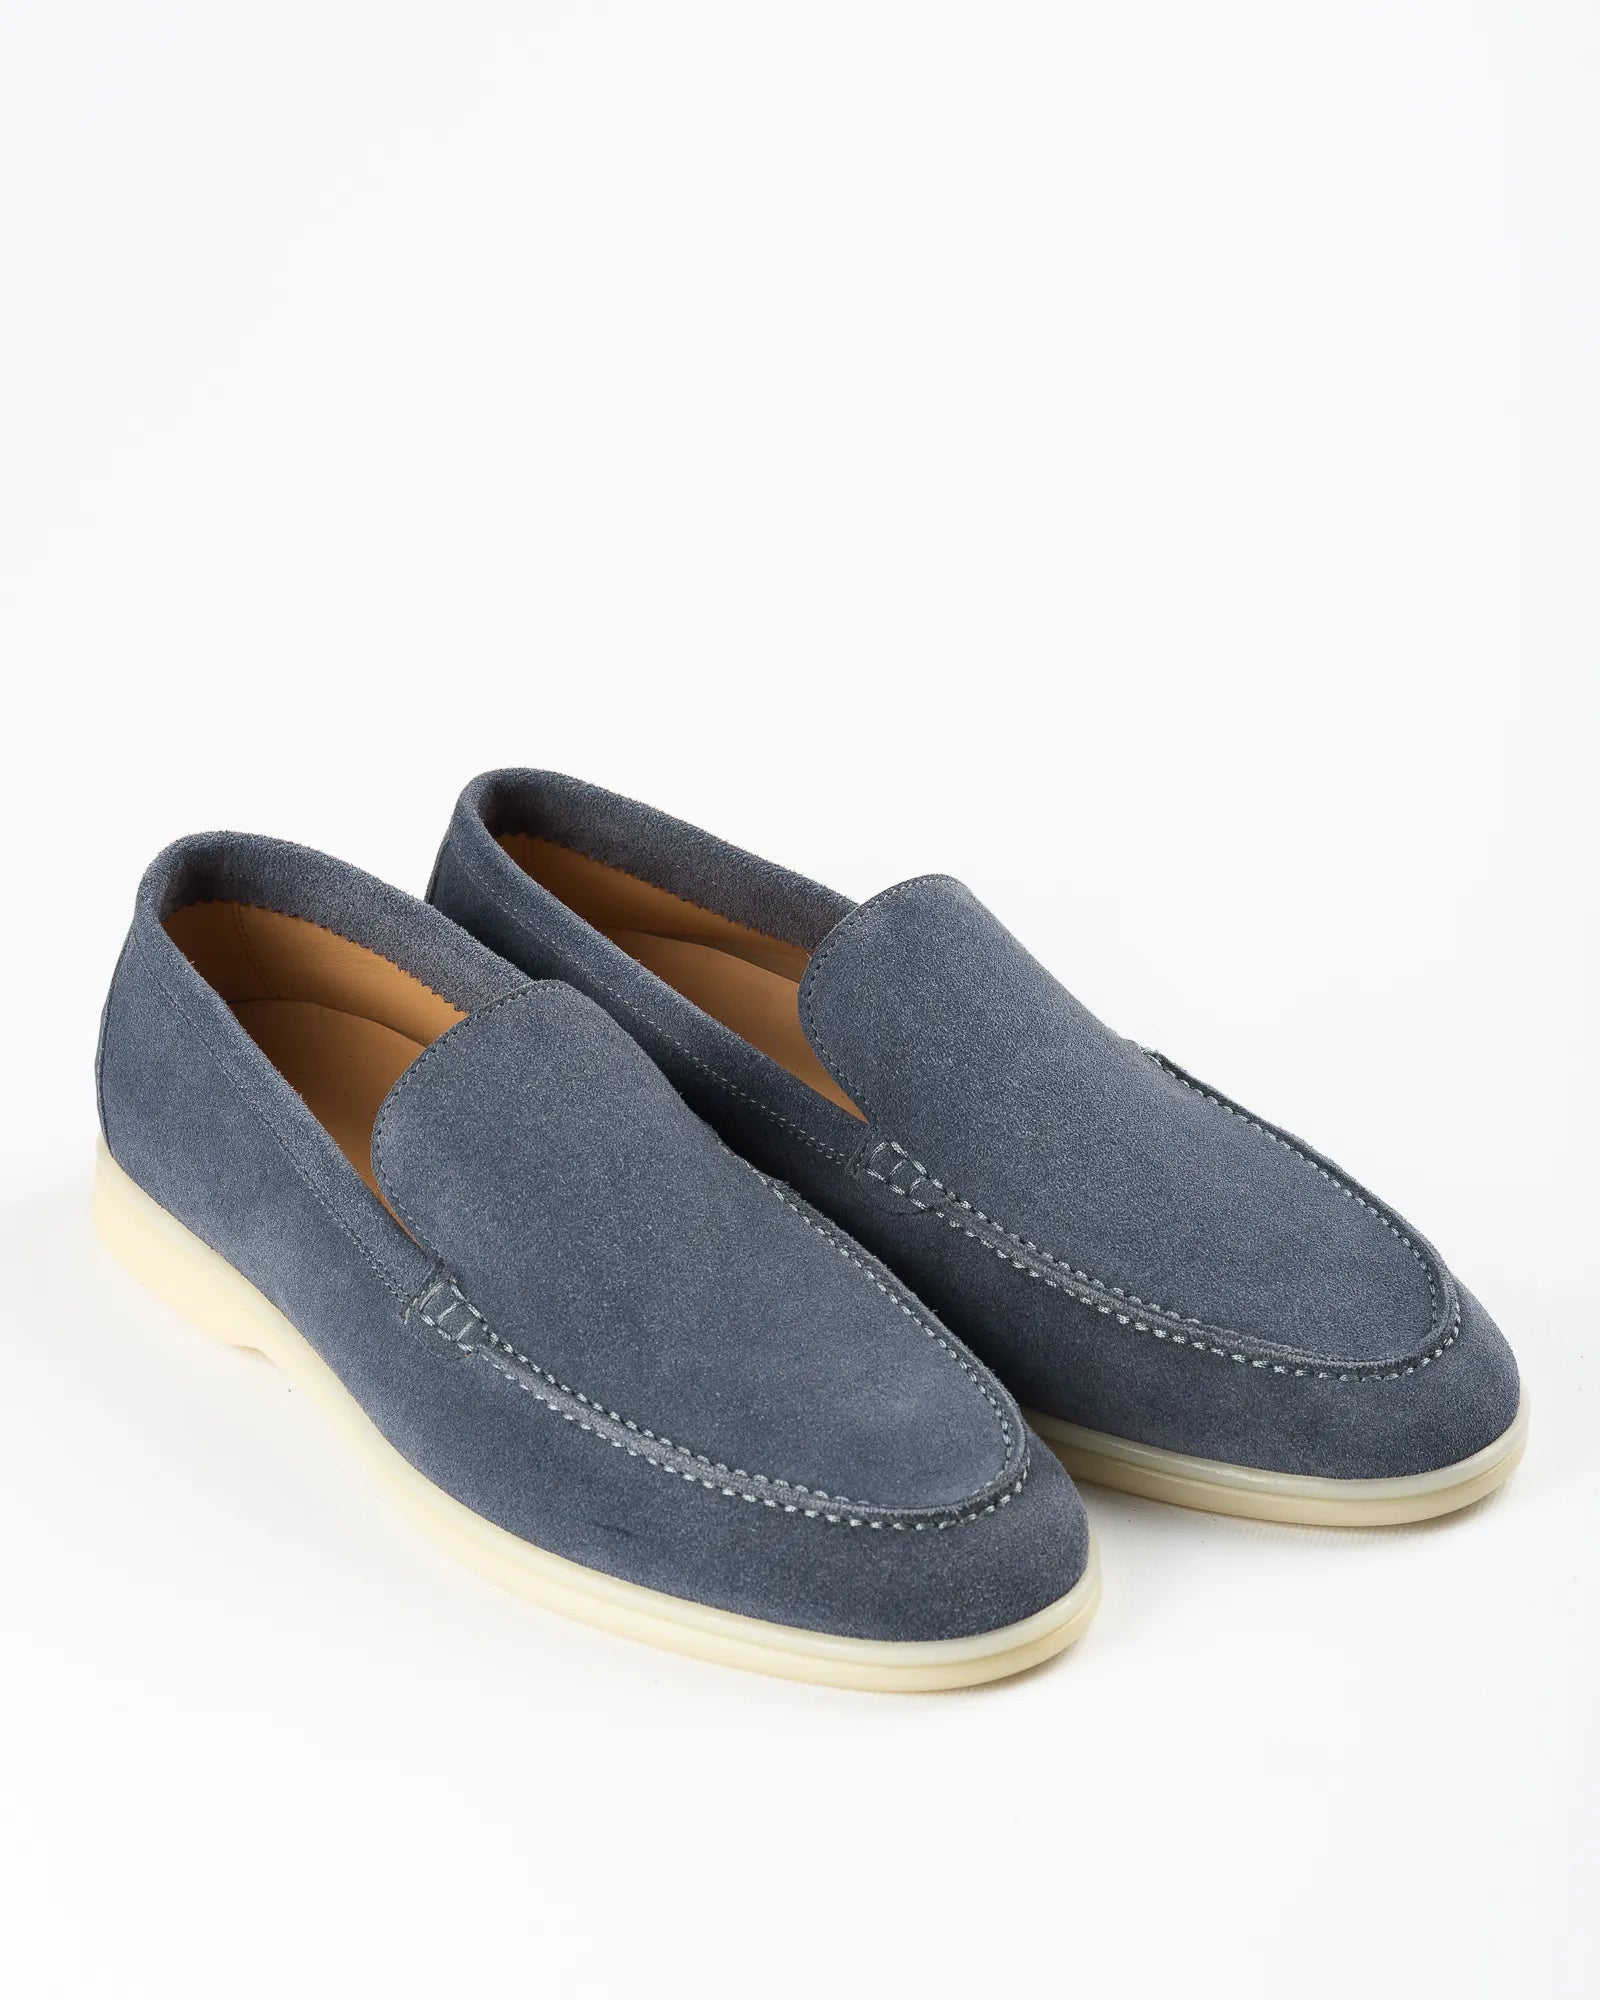 Men's Genuine Suede Loafers Moccasins Jeans